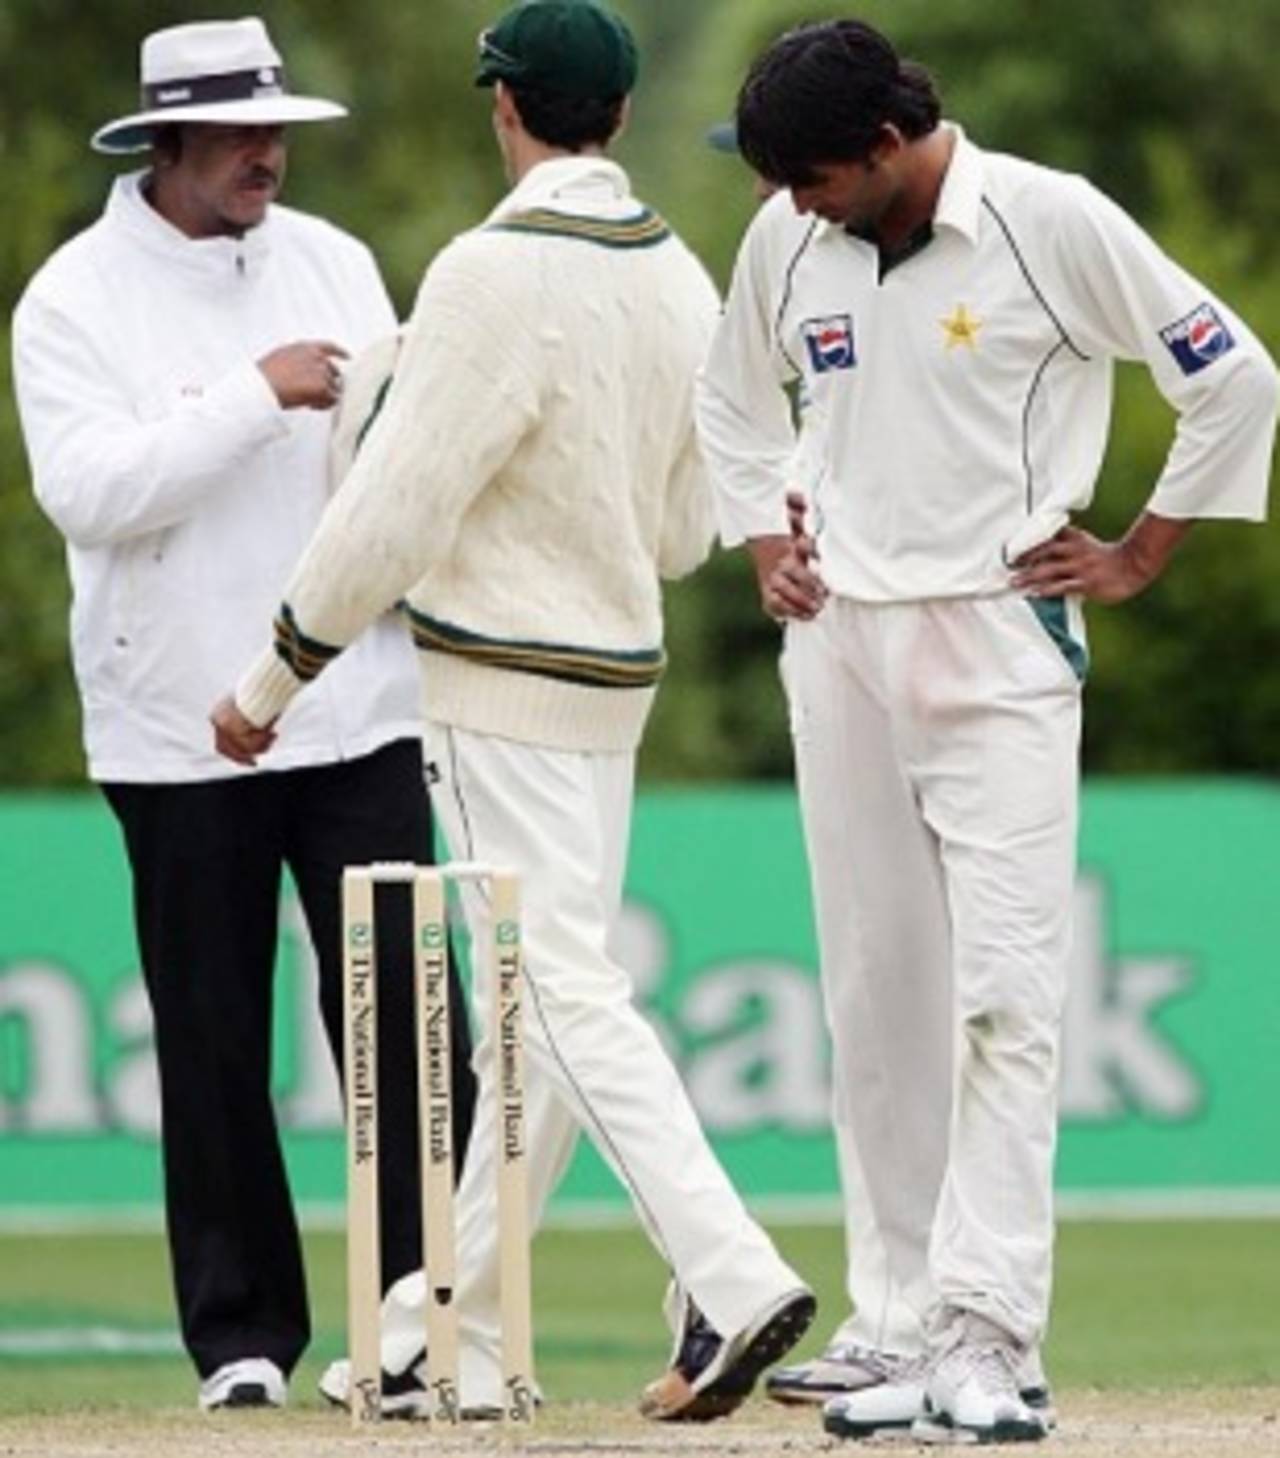 Mohammad Asif looks at the crease after a no-ball was called following a review of an lbw appeal, New Zealand v Pakistan, 1st Test, Dunedin, 4th day, November 27, 2009